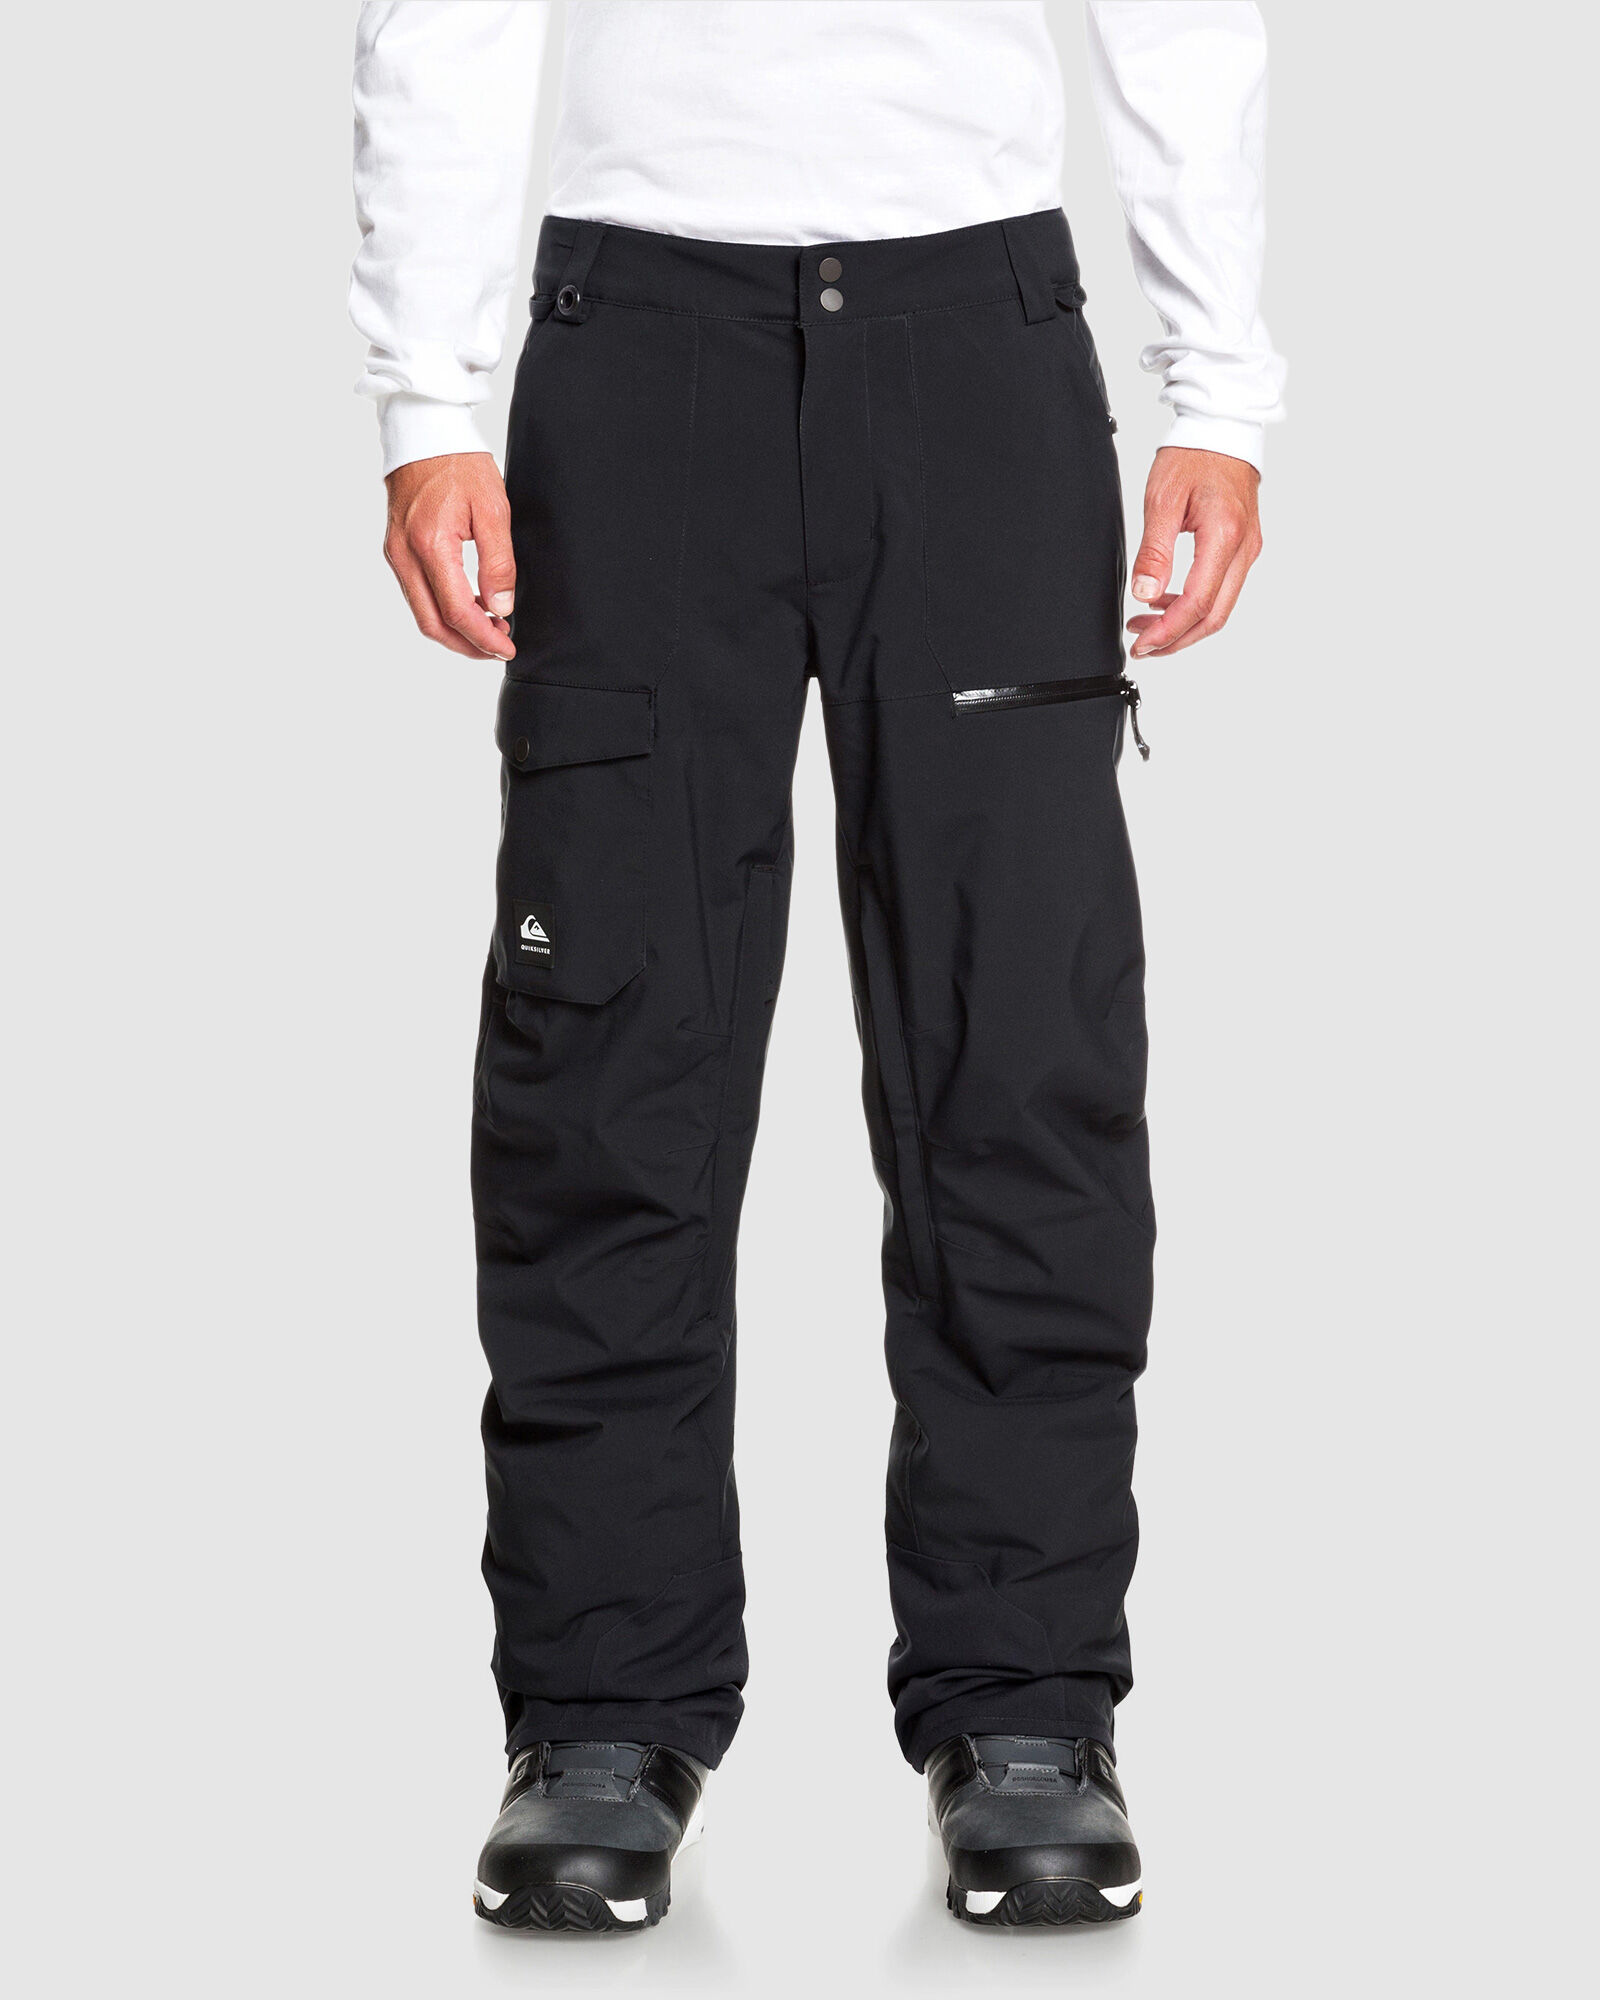 Quiksilver Utility Bib Snow Pants - The whole Europe's Skate- and Surfshop